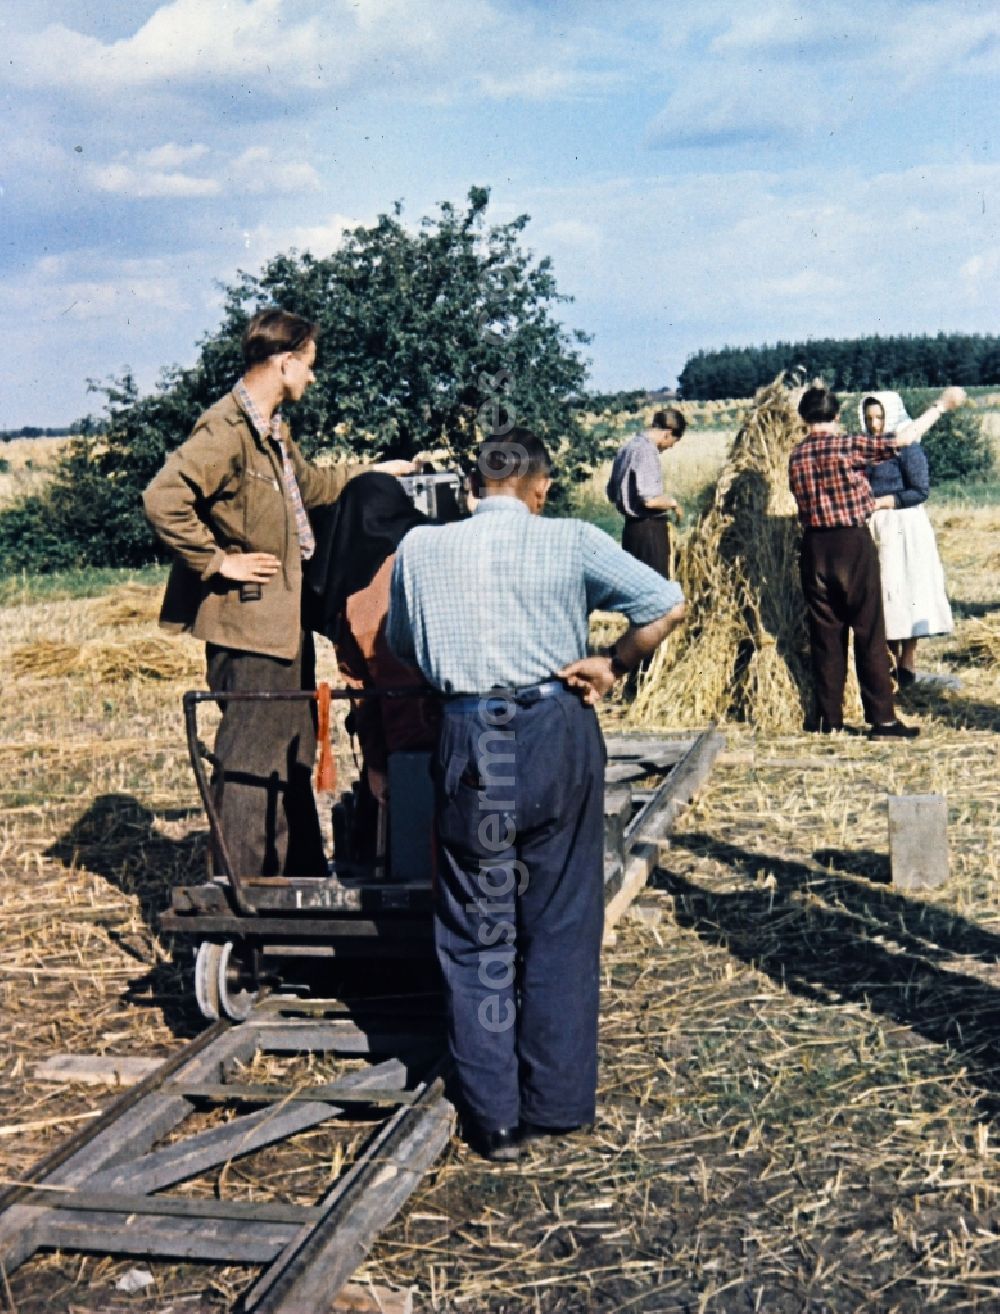 GDR picture archive: Teicha - Farmers harvesting grain and sheaf laying on a harvested field in Teicha in the state Saxony on the territory of the former GDR, German Democratic Republic